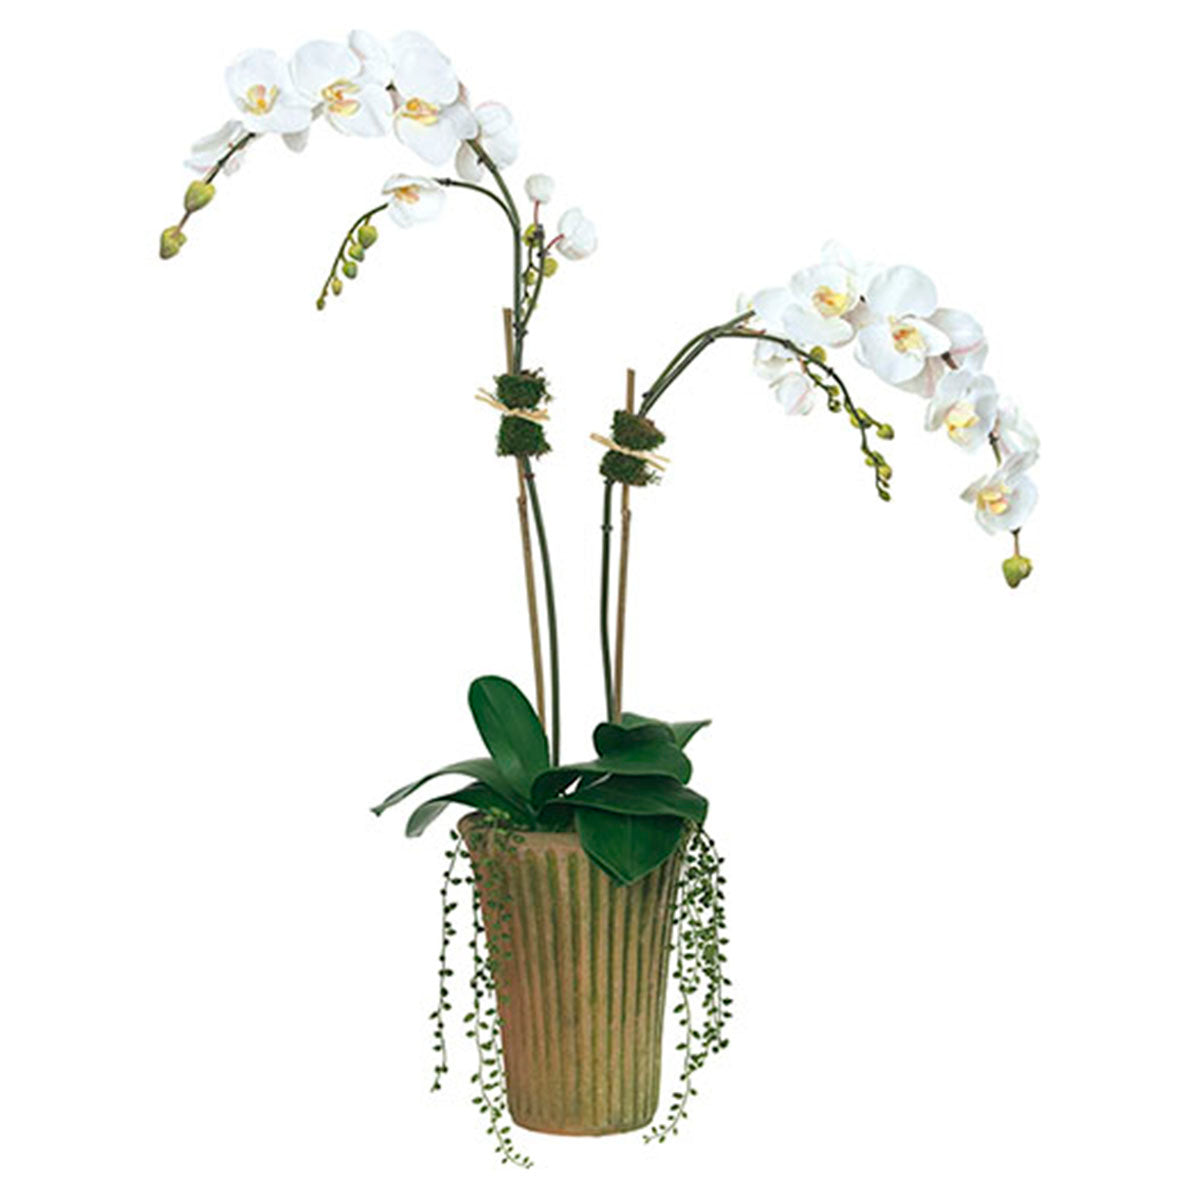 Diane James White Phalaenopsis Orchid in Mossy Planter